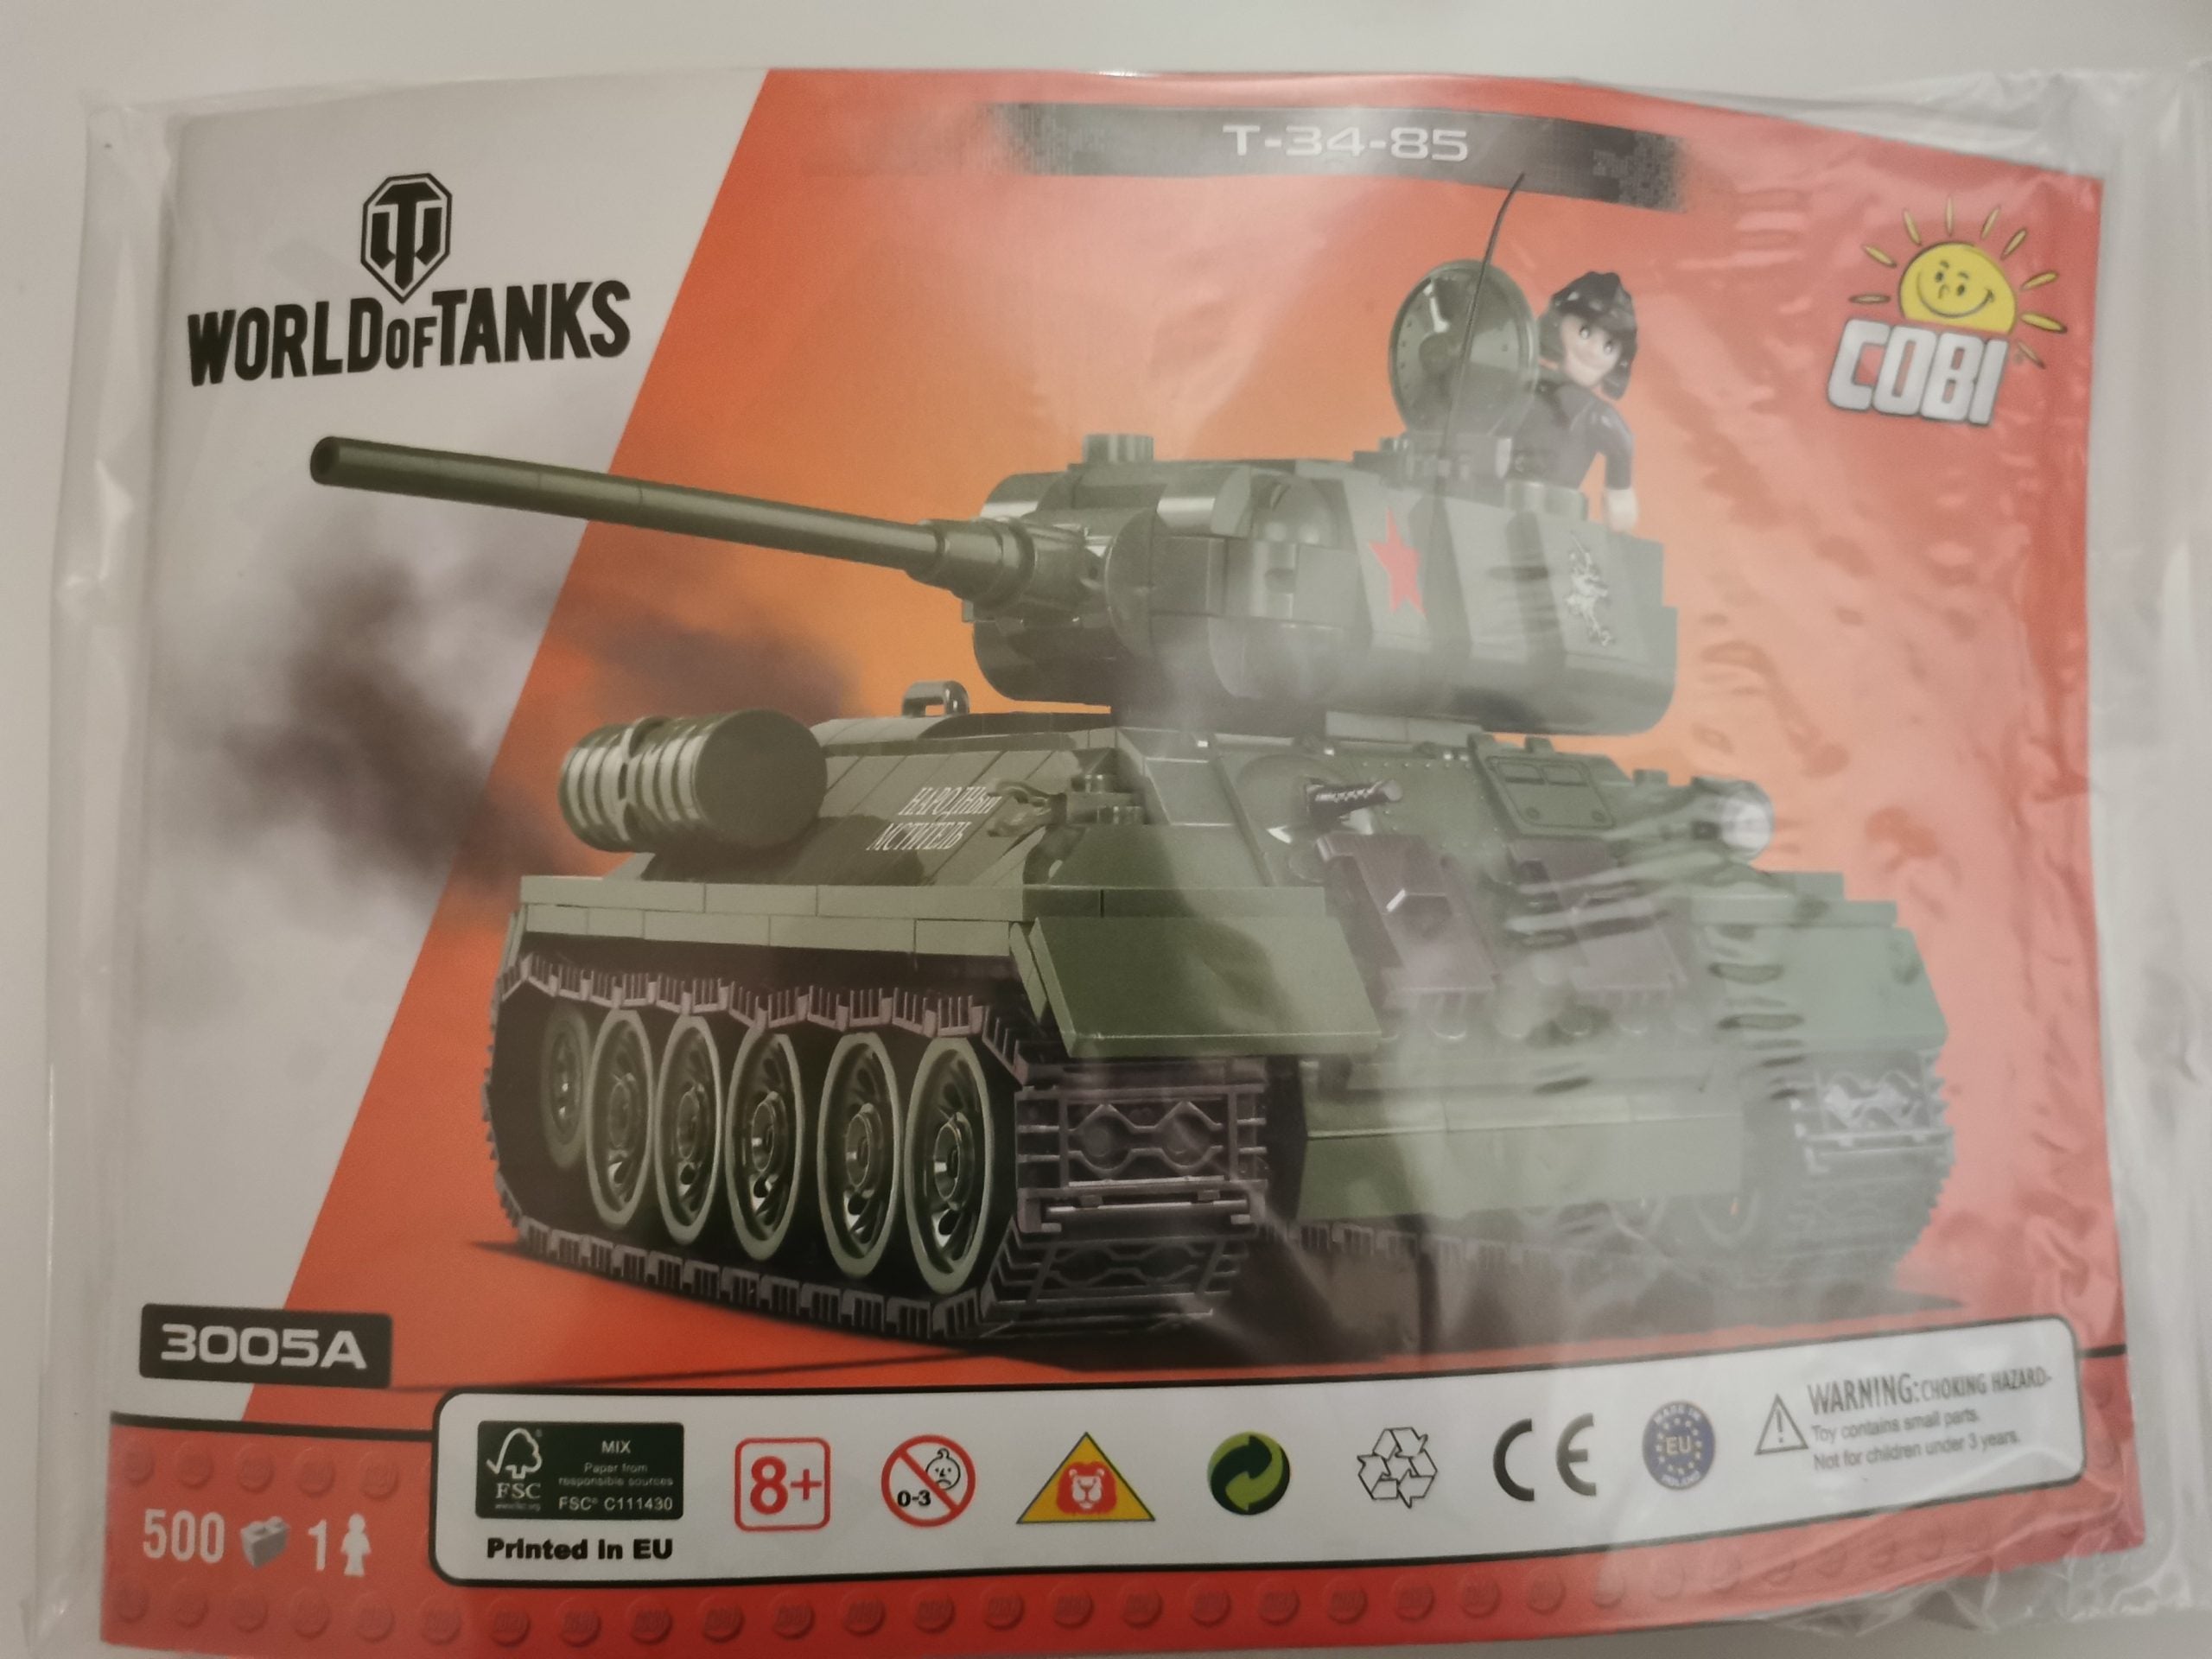 Cobi 3005A T-34/85 (World of Tanks) used